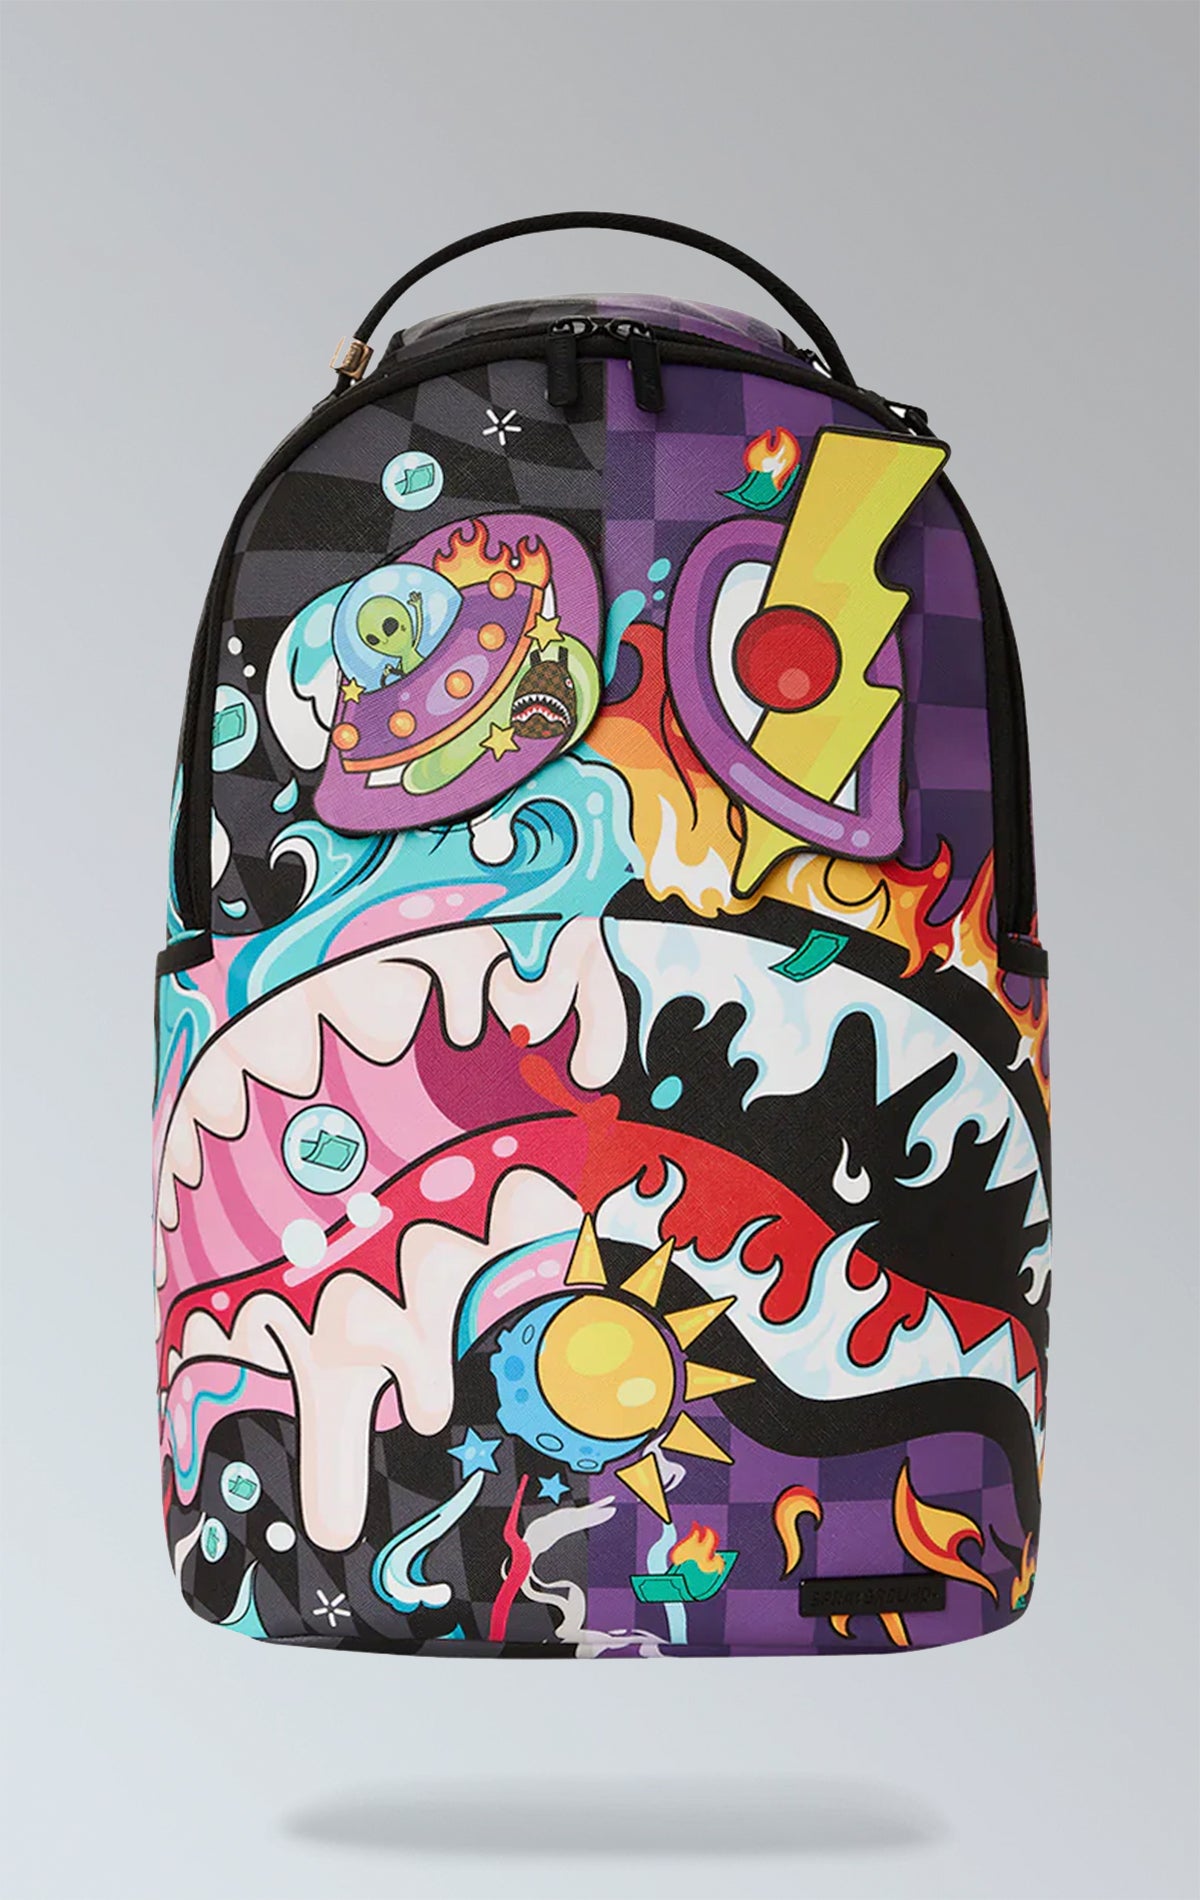 Colorful Sprayground backpack with the iconic Crazy Eyes design. Features multiple compartments including a separate velour laptop compartment, side pockets, and a hidden zippered pocket.  Equipped with ergonomic mesh back padding, adjustable straps, and a sliding back sleeve for attaching to carry-on luggage. Made from durable vegan leather.